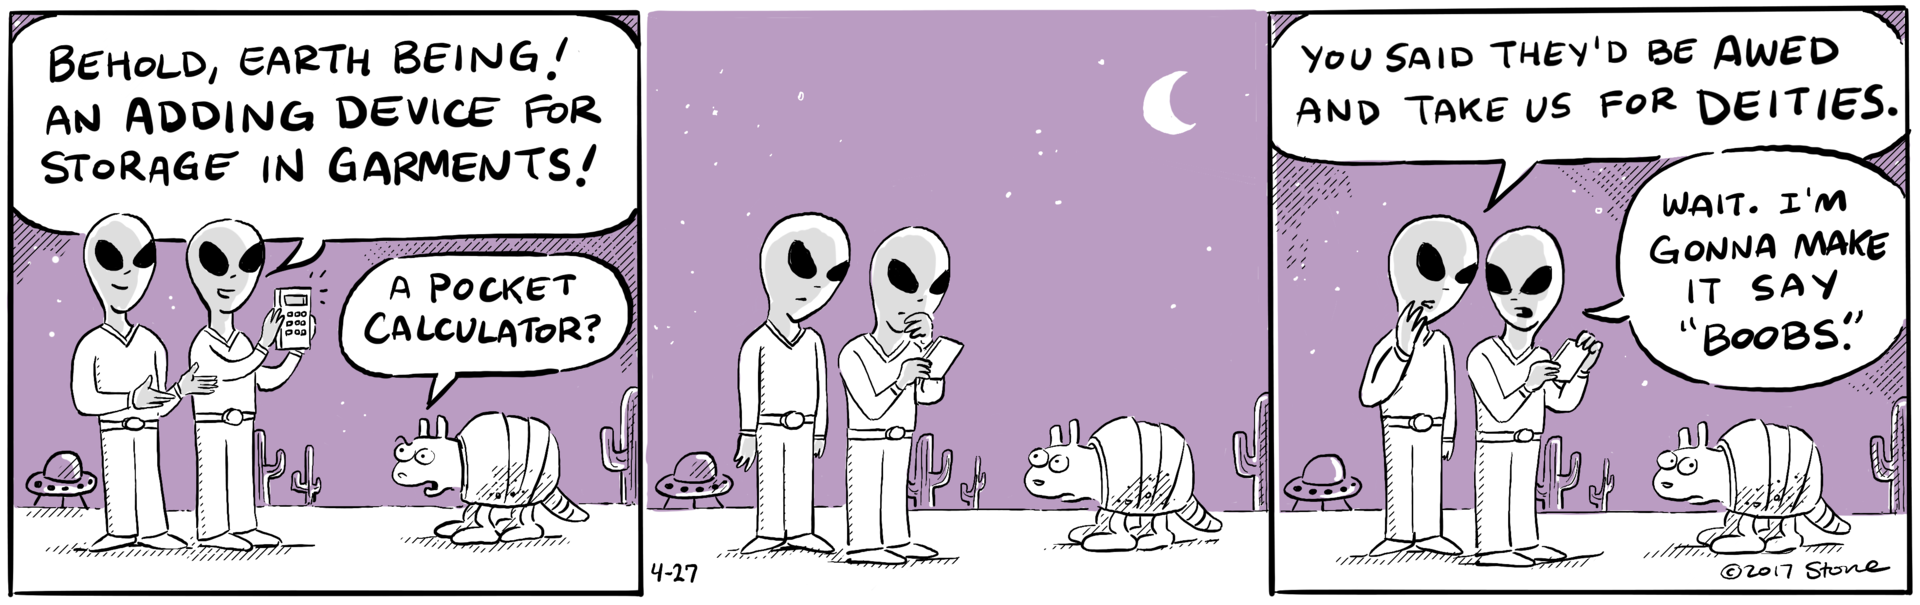 Roswell and Grey, two clueless extraterrestrial visitors, land nearby the lab.